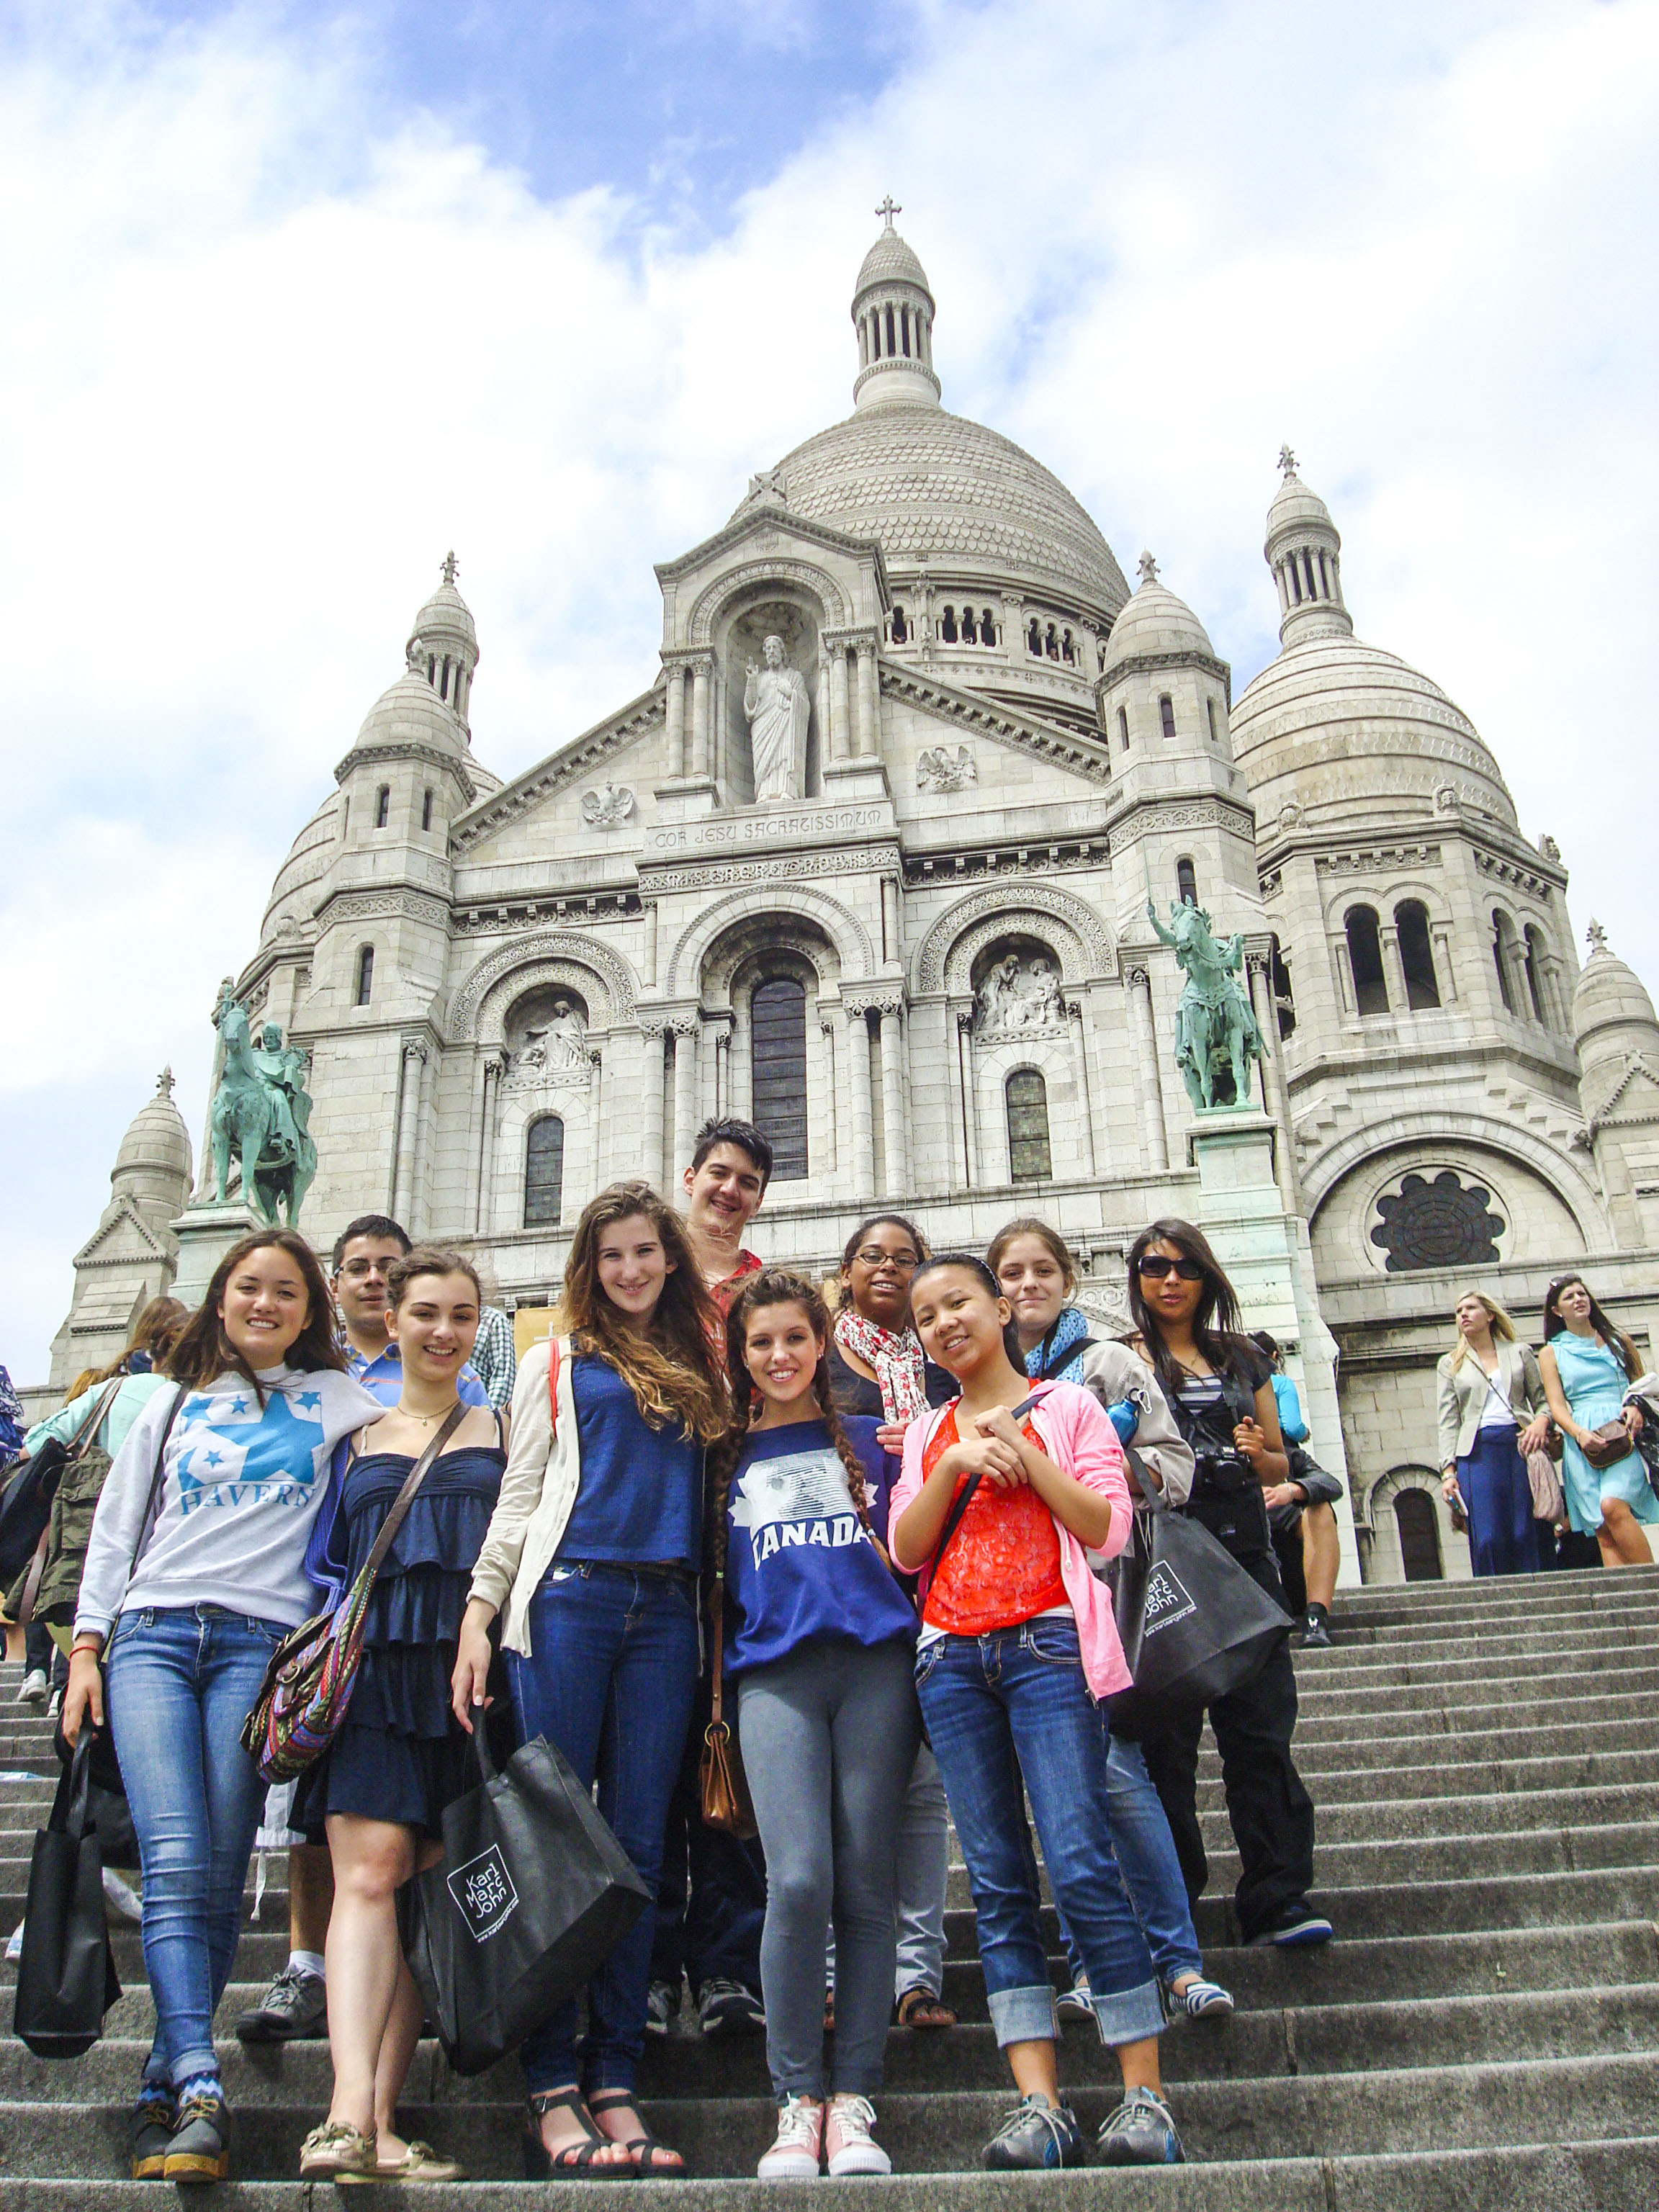 Study in France to improve your French language skills through classes and cultural immersion. Visit the world’s most celebrated art museums in Paris and go on a quest to capture the city’s charm under the guidance of a French photographer. There is no better way to study abroad in France! Students standing on the steps in front of Sacre Coeur